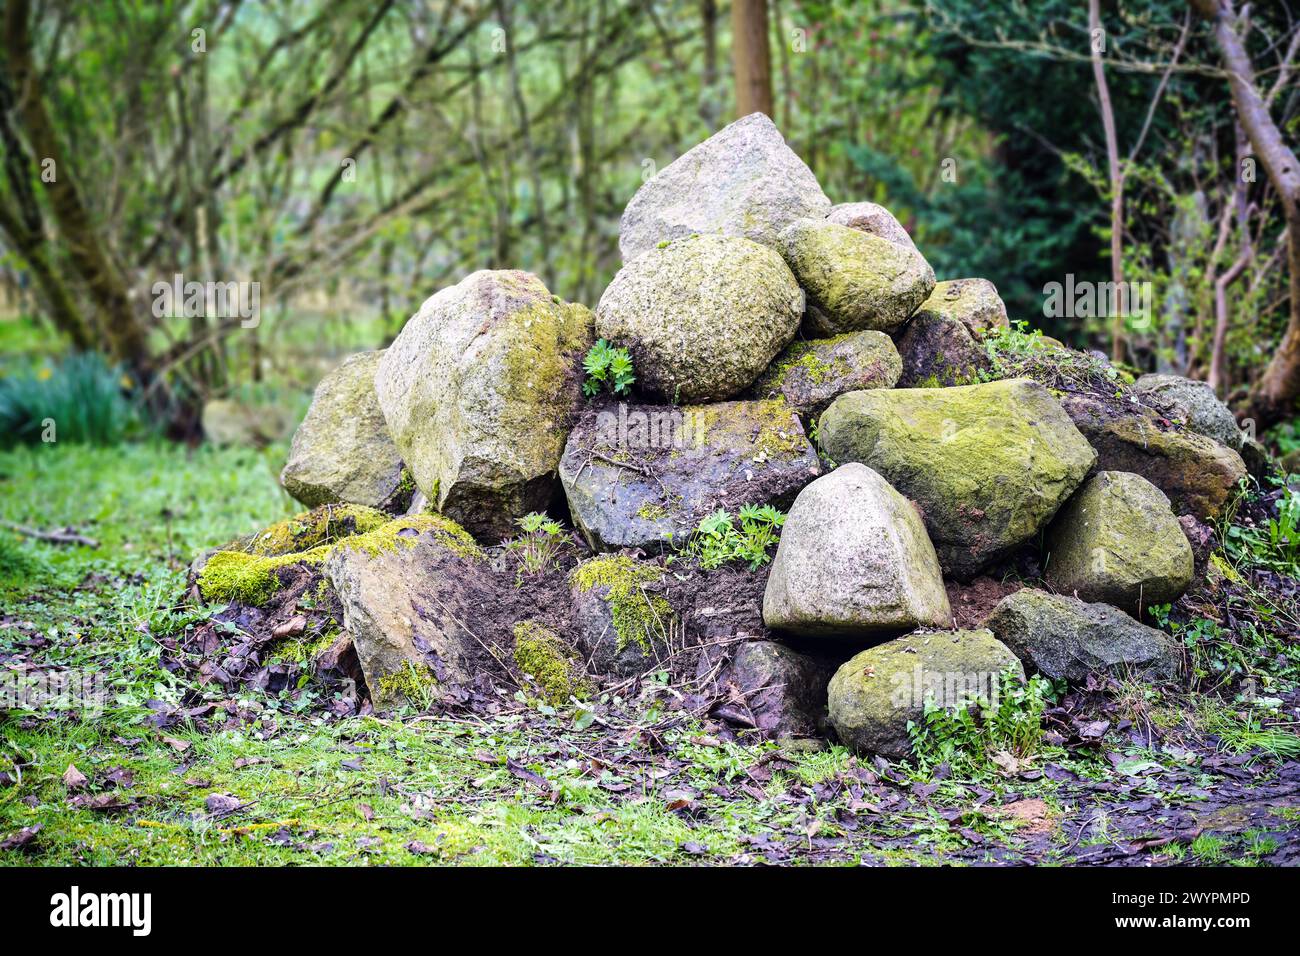 Ecological stone pile, a natural paradise in the garden, small caves and niches offer hiding places, protection and habitat for many animals, copy spa Stock Photo